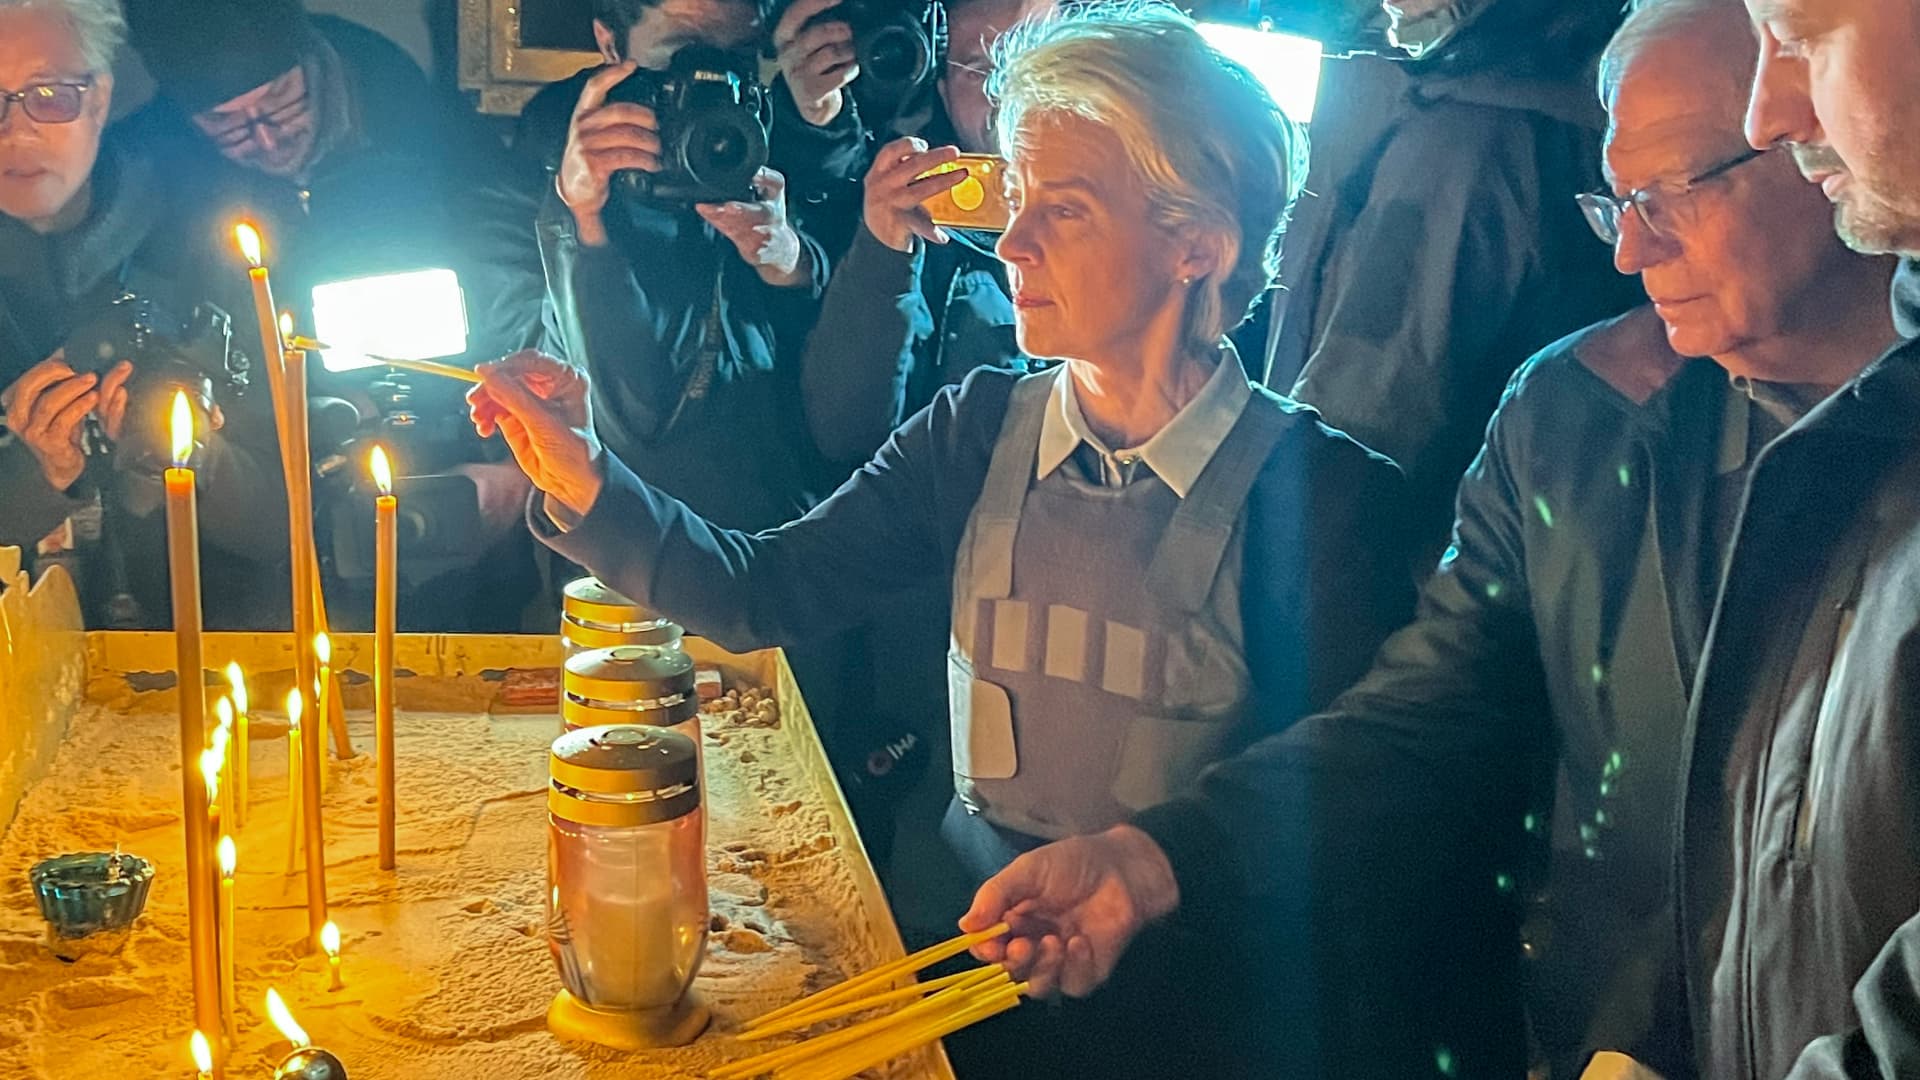 EU Commission President Ursula von der Leyen and EU High Representative for Foreign Affairs Josep Borrell (2nd from right) light candles for the victims of the massacre in a church next to a mass grave in Bucha on April 8th, 2022.